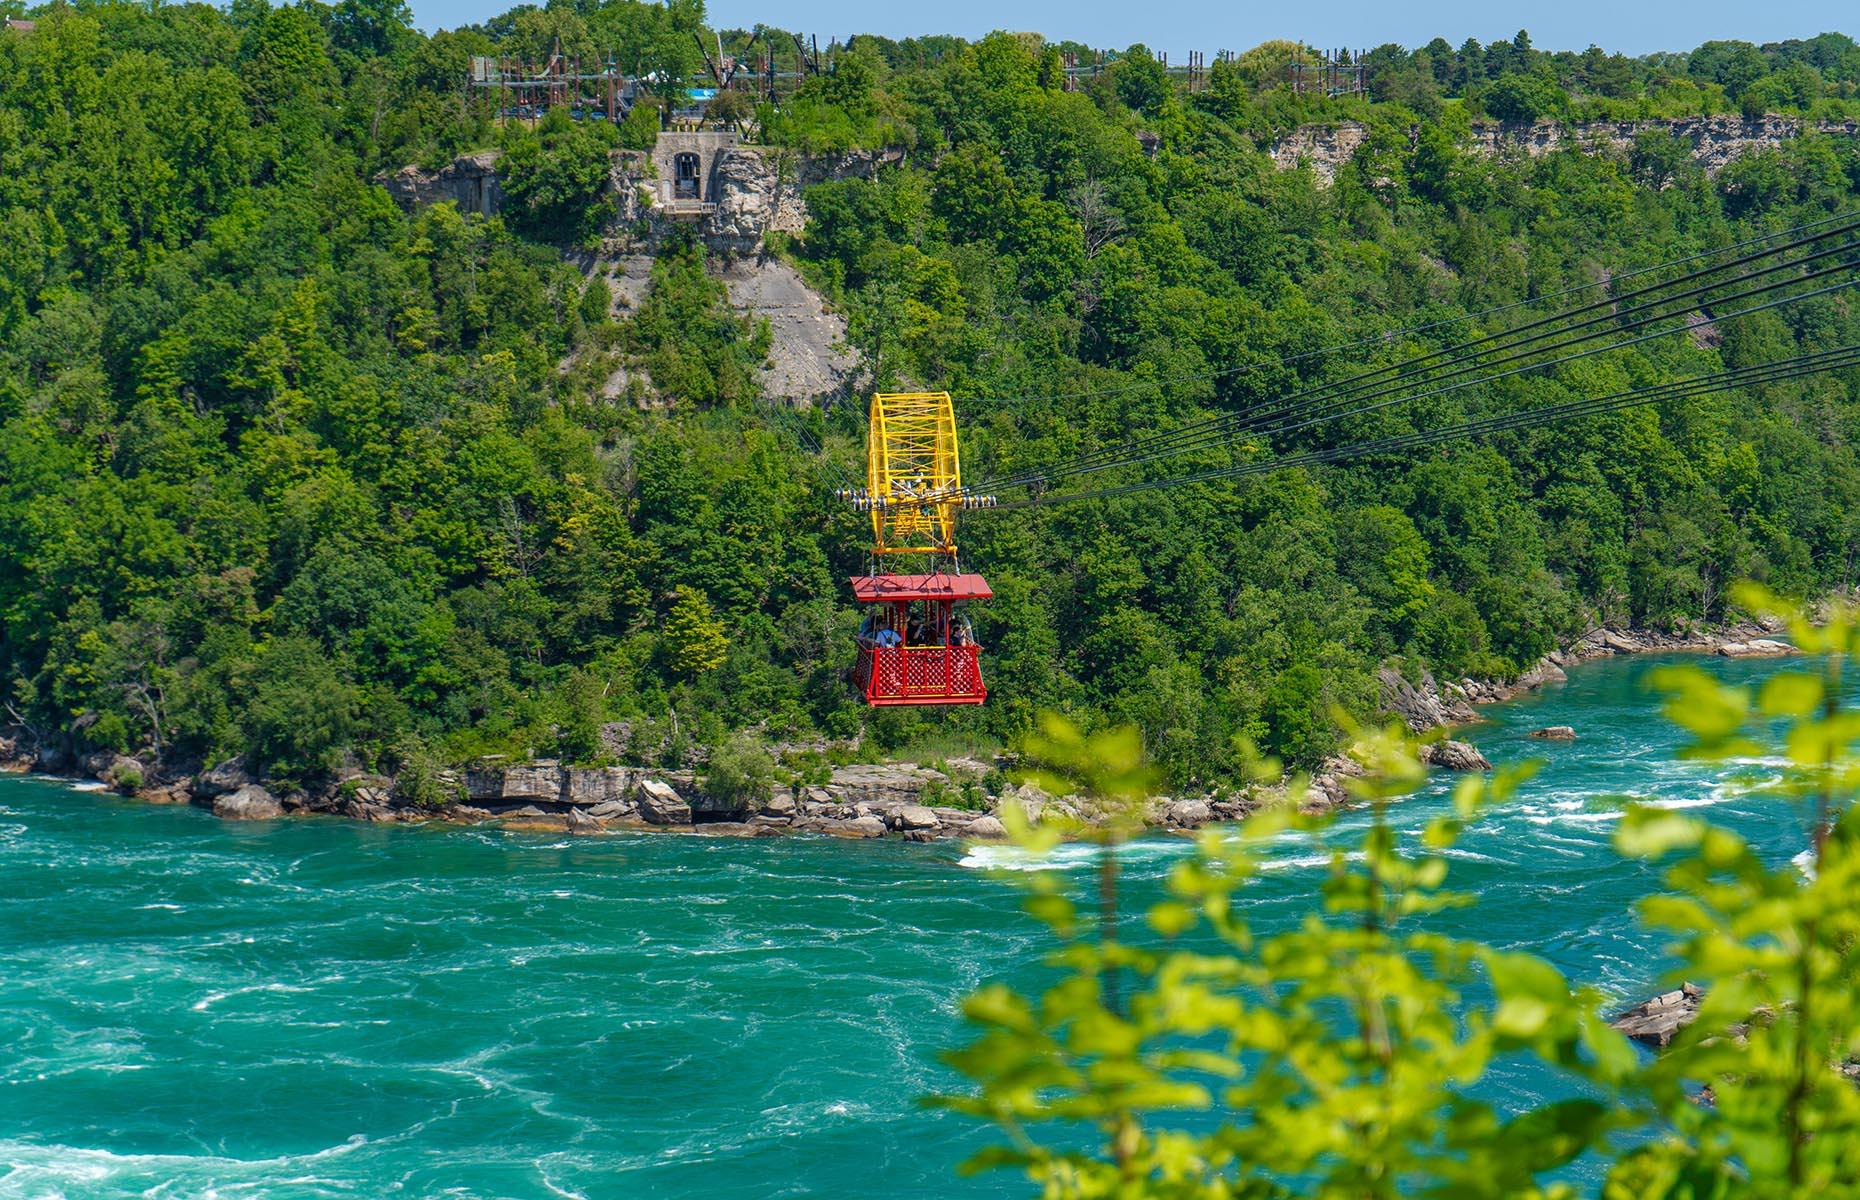 Once on board, you’ll witness the whitewater rapids and swirling Niagara Whirlpool as the car crosses the international border between Canada and the US; don’t worry, you won’t need your passport. The whirlpool is created at the end of the rapids where the gorge forces the river to suddenly turn counterclockwise. Your camera won’t do this mesmerising natural phenomenon justice.